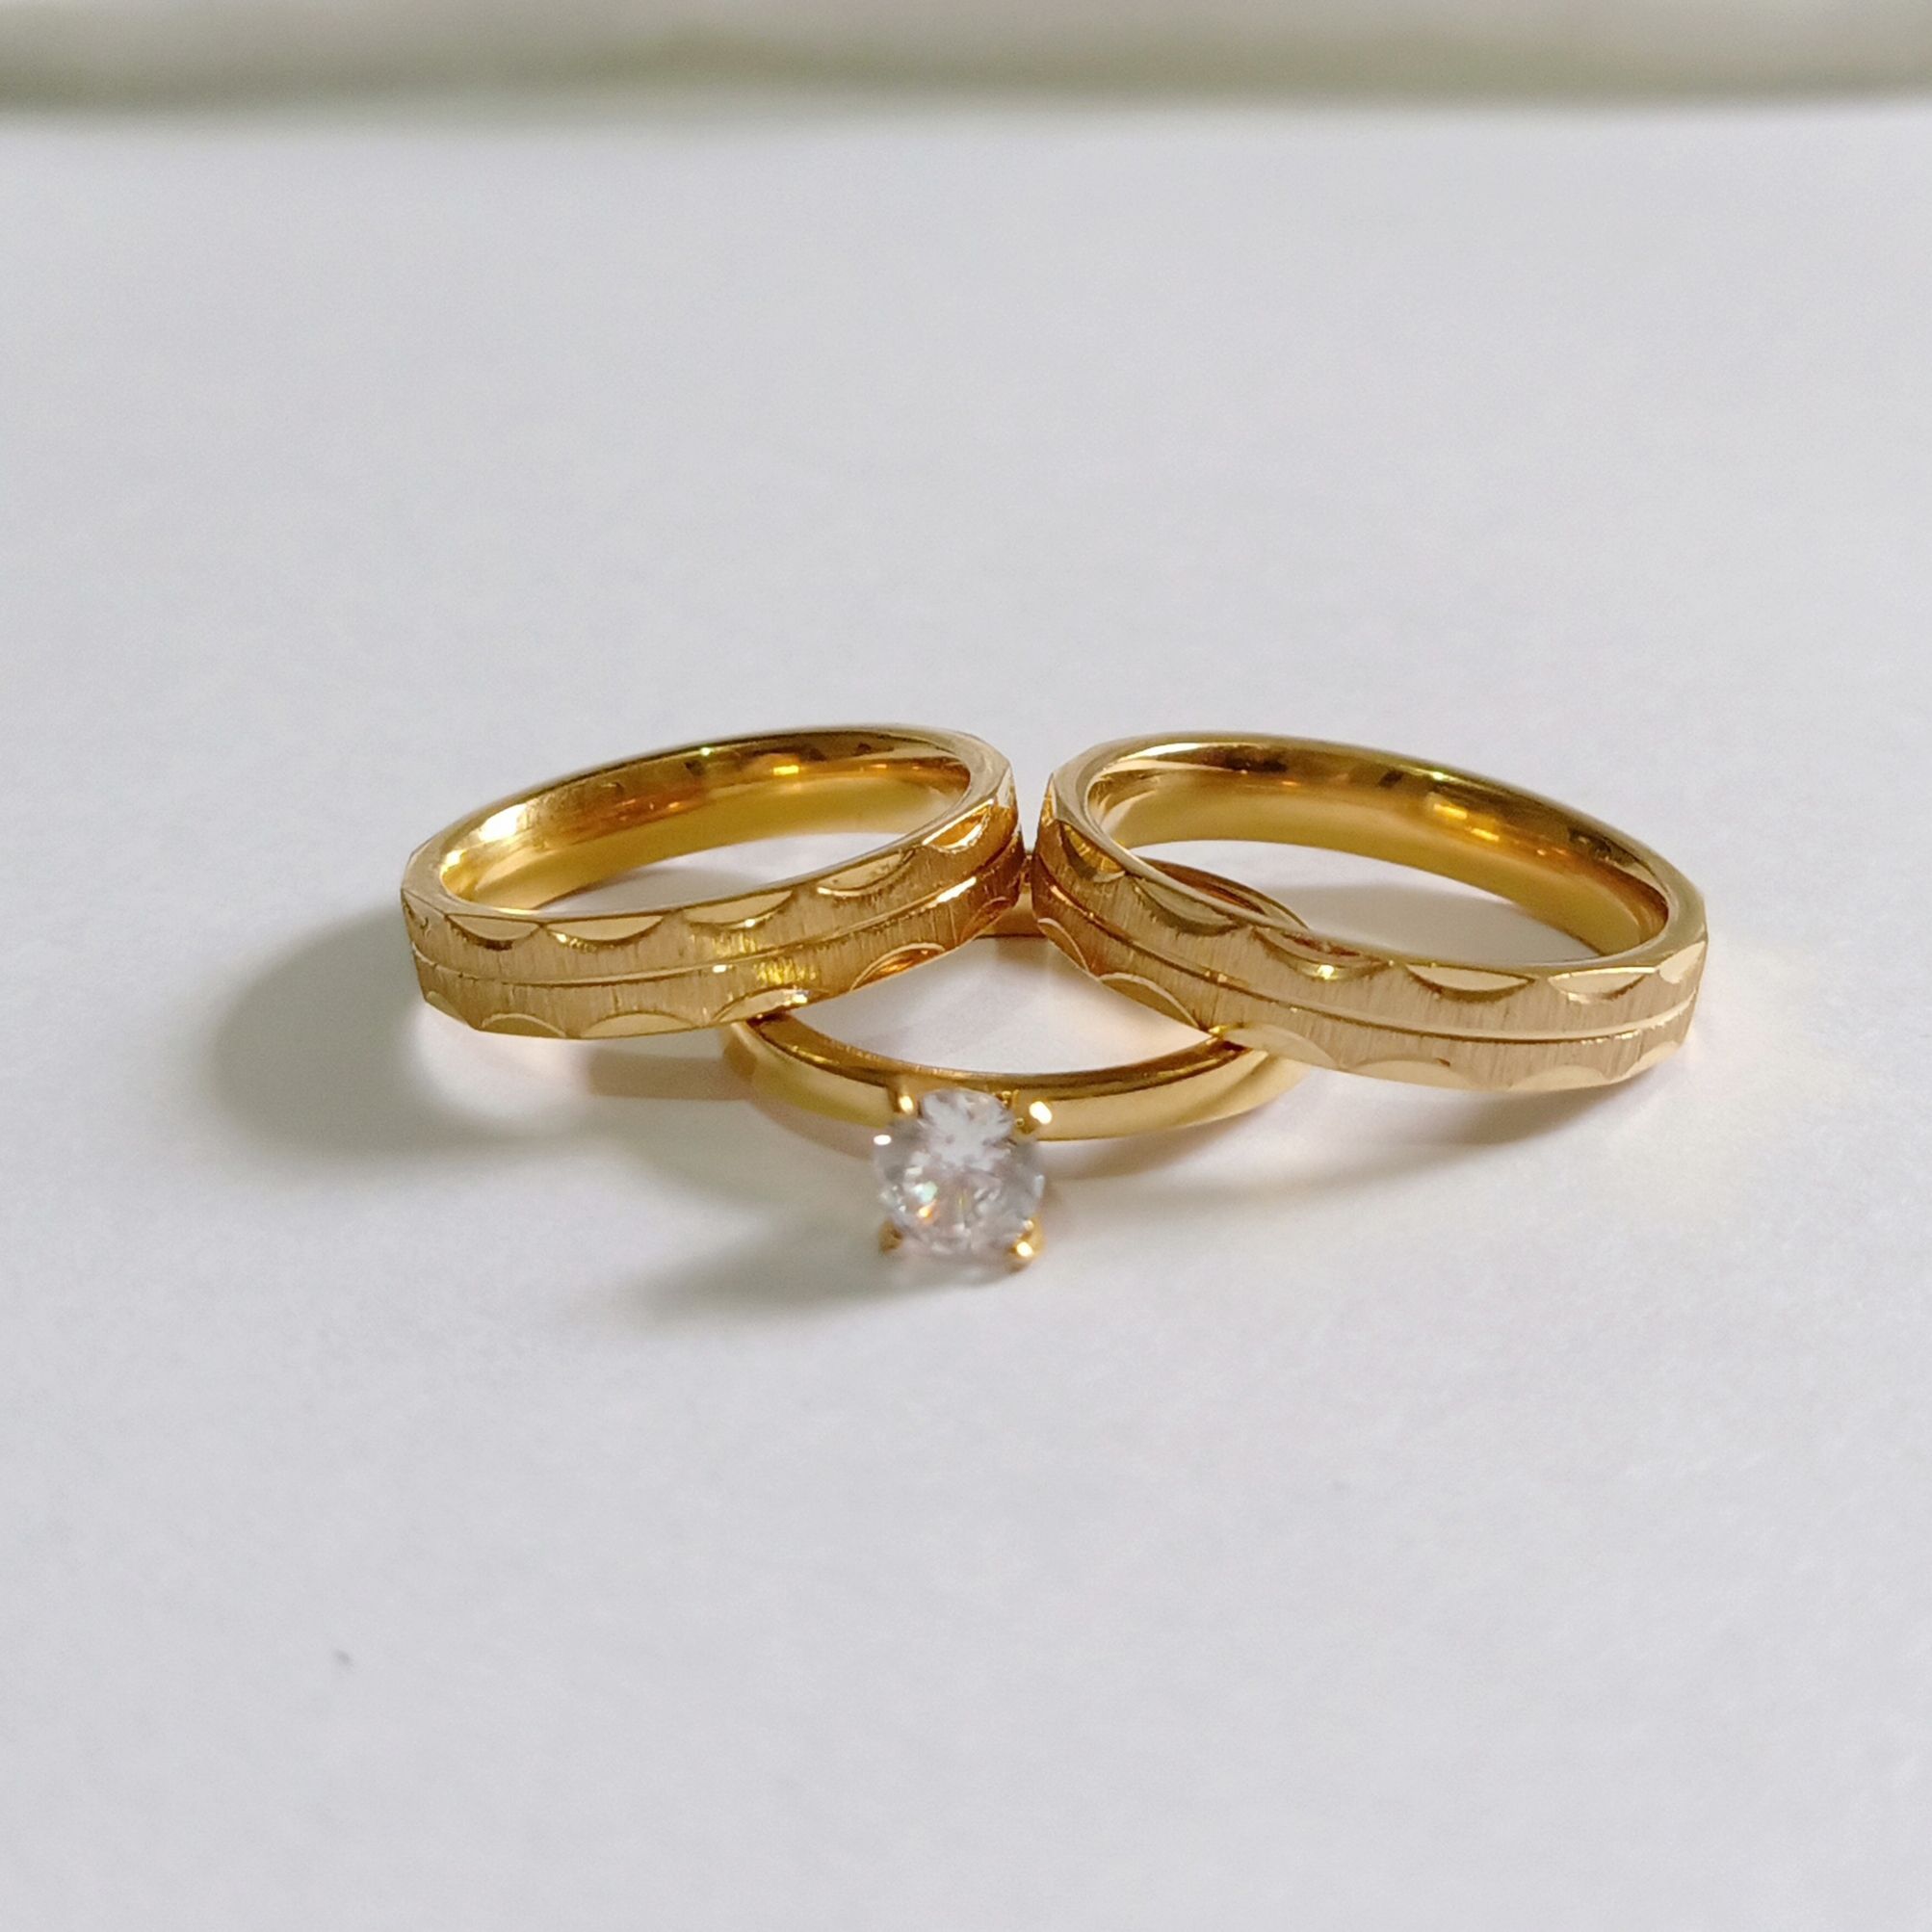 Couple Ring Wedding Ring Engagement Ring 3 In 1 Gold Plated With Free Box ( 3  Rings ) Review And Price